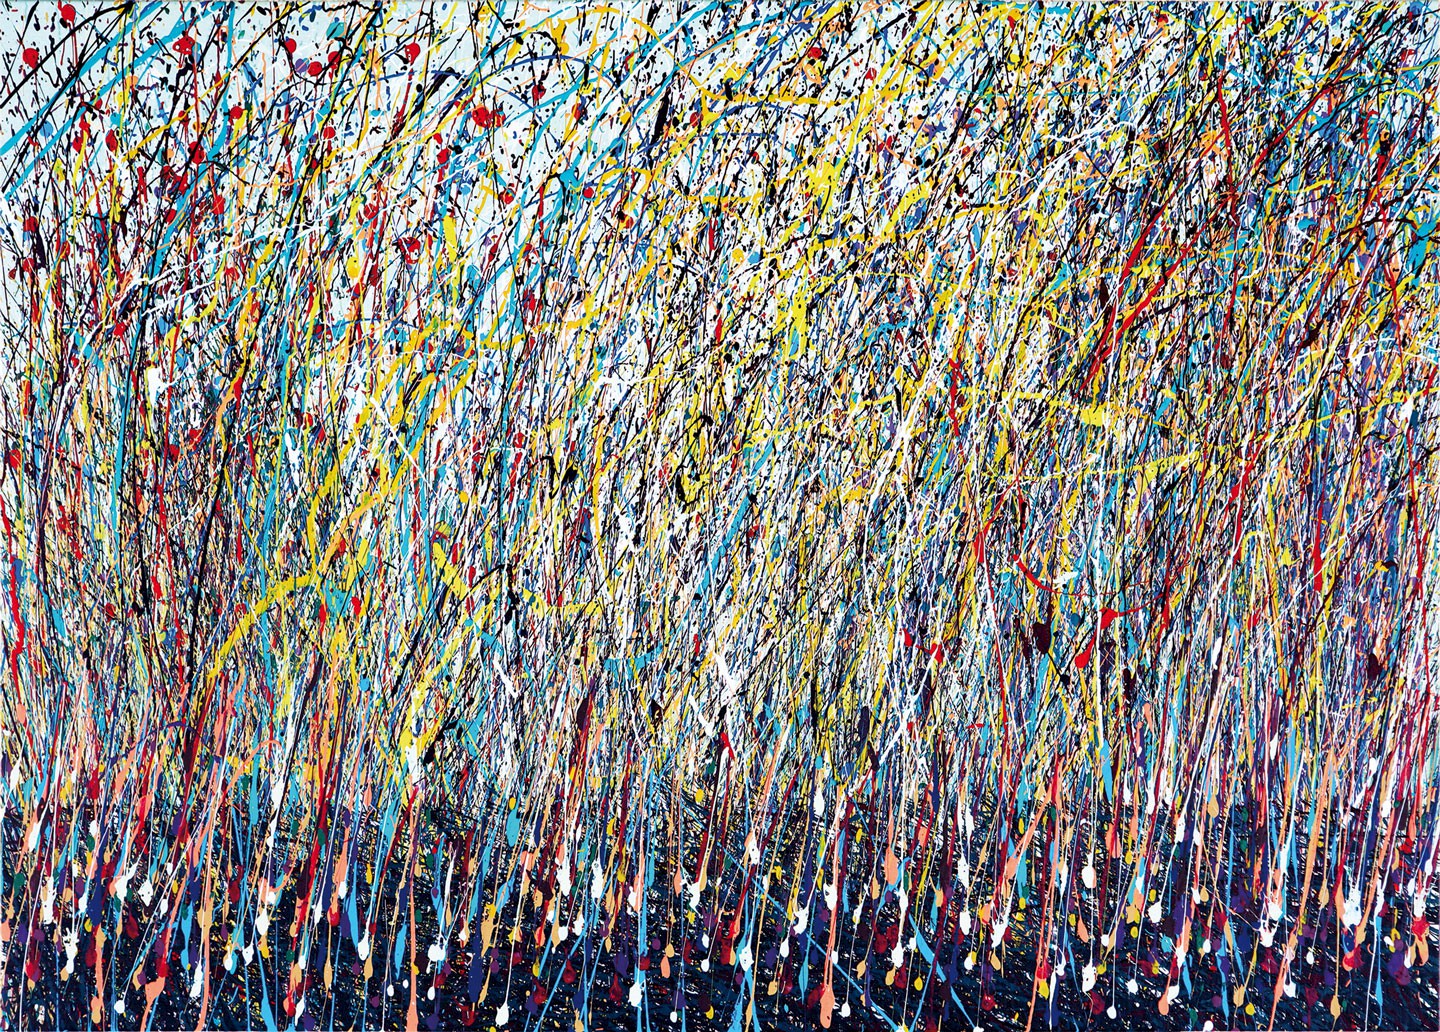 Explosion of colour from a dark background, arranged like grasses and flowers.